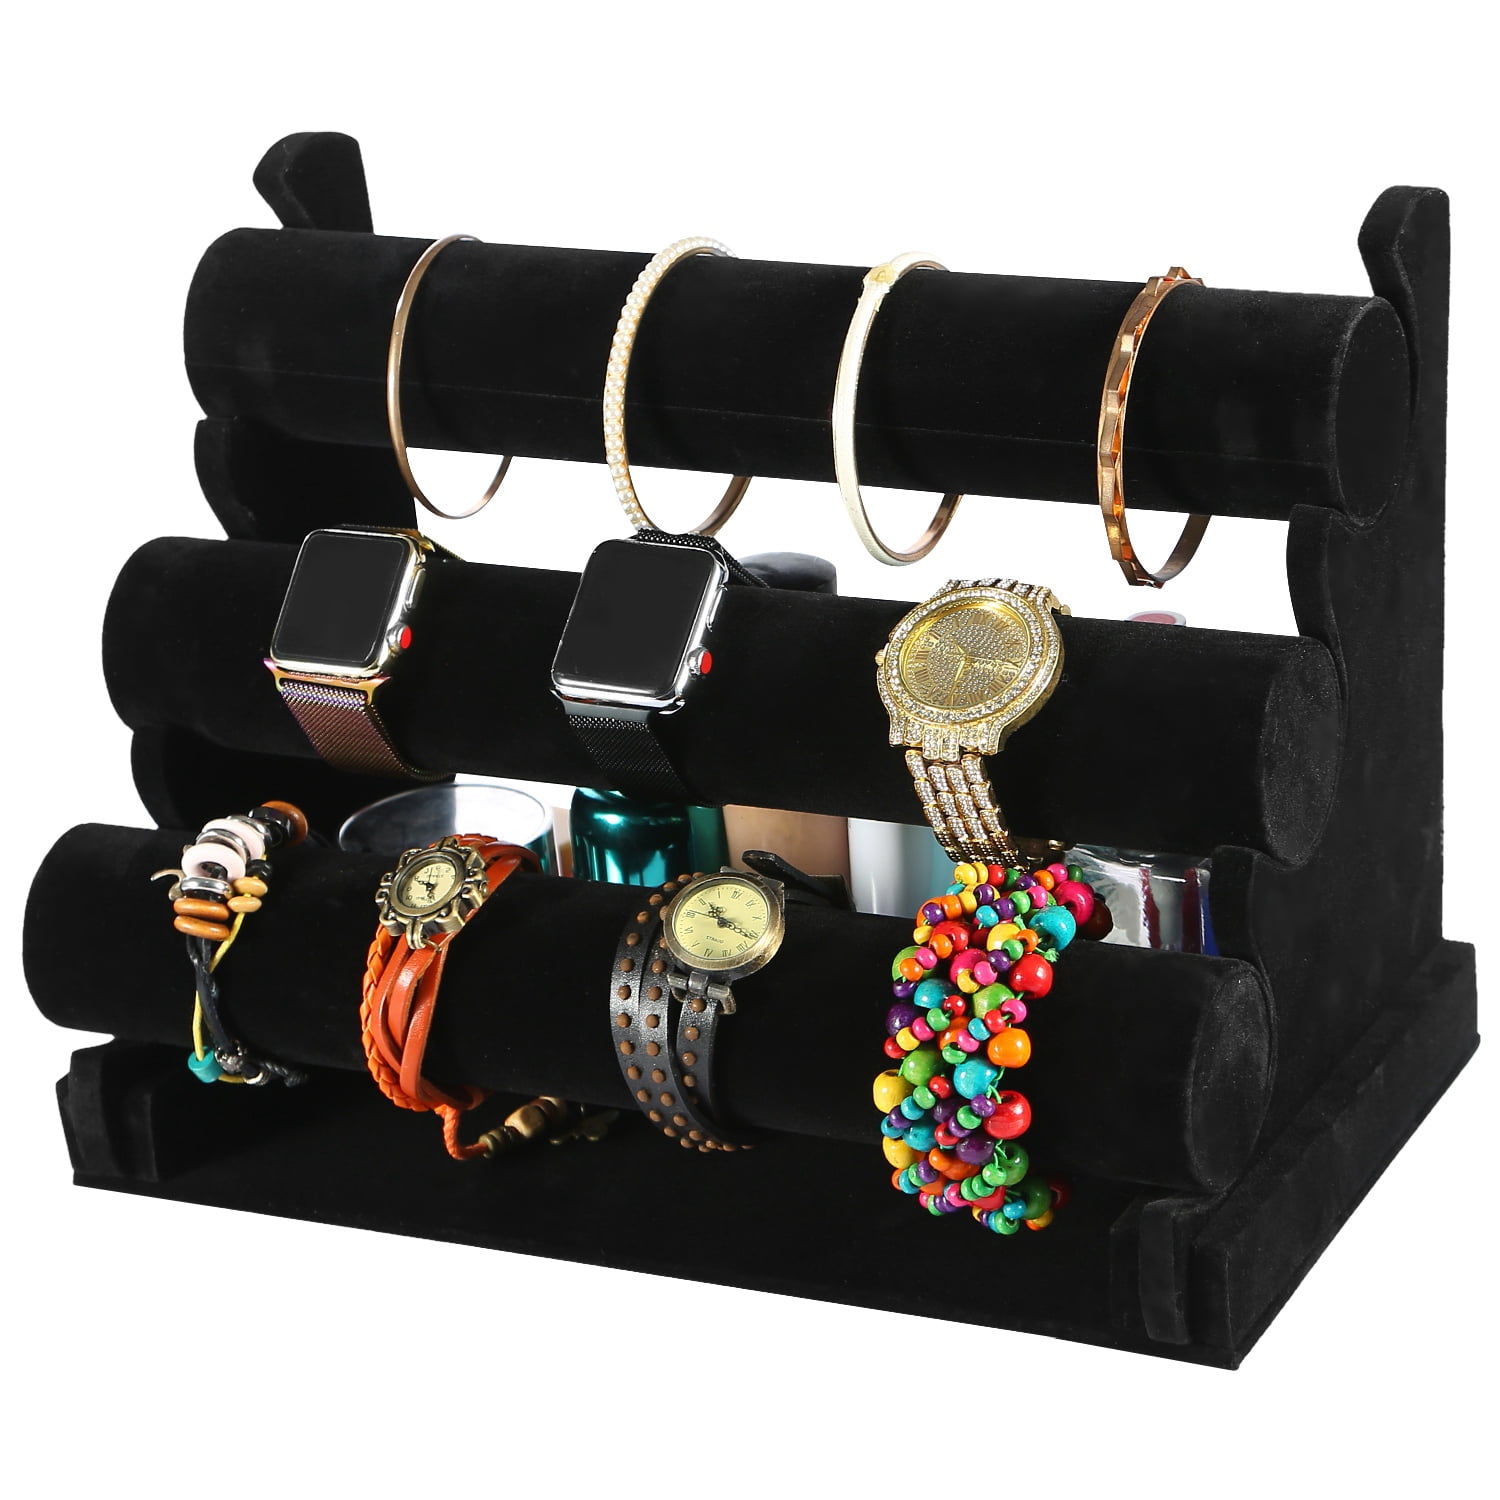 Gray Velvet 3 Tier Bracelet Holder, T-Bar Organizer Jewelry Stand for  Displaying Watches, Necklaces, Storage (12.0 x 9.5 x 5.5 In)